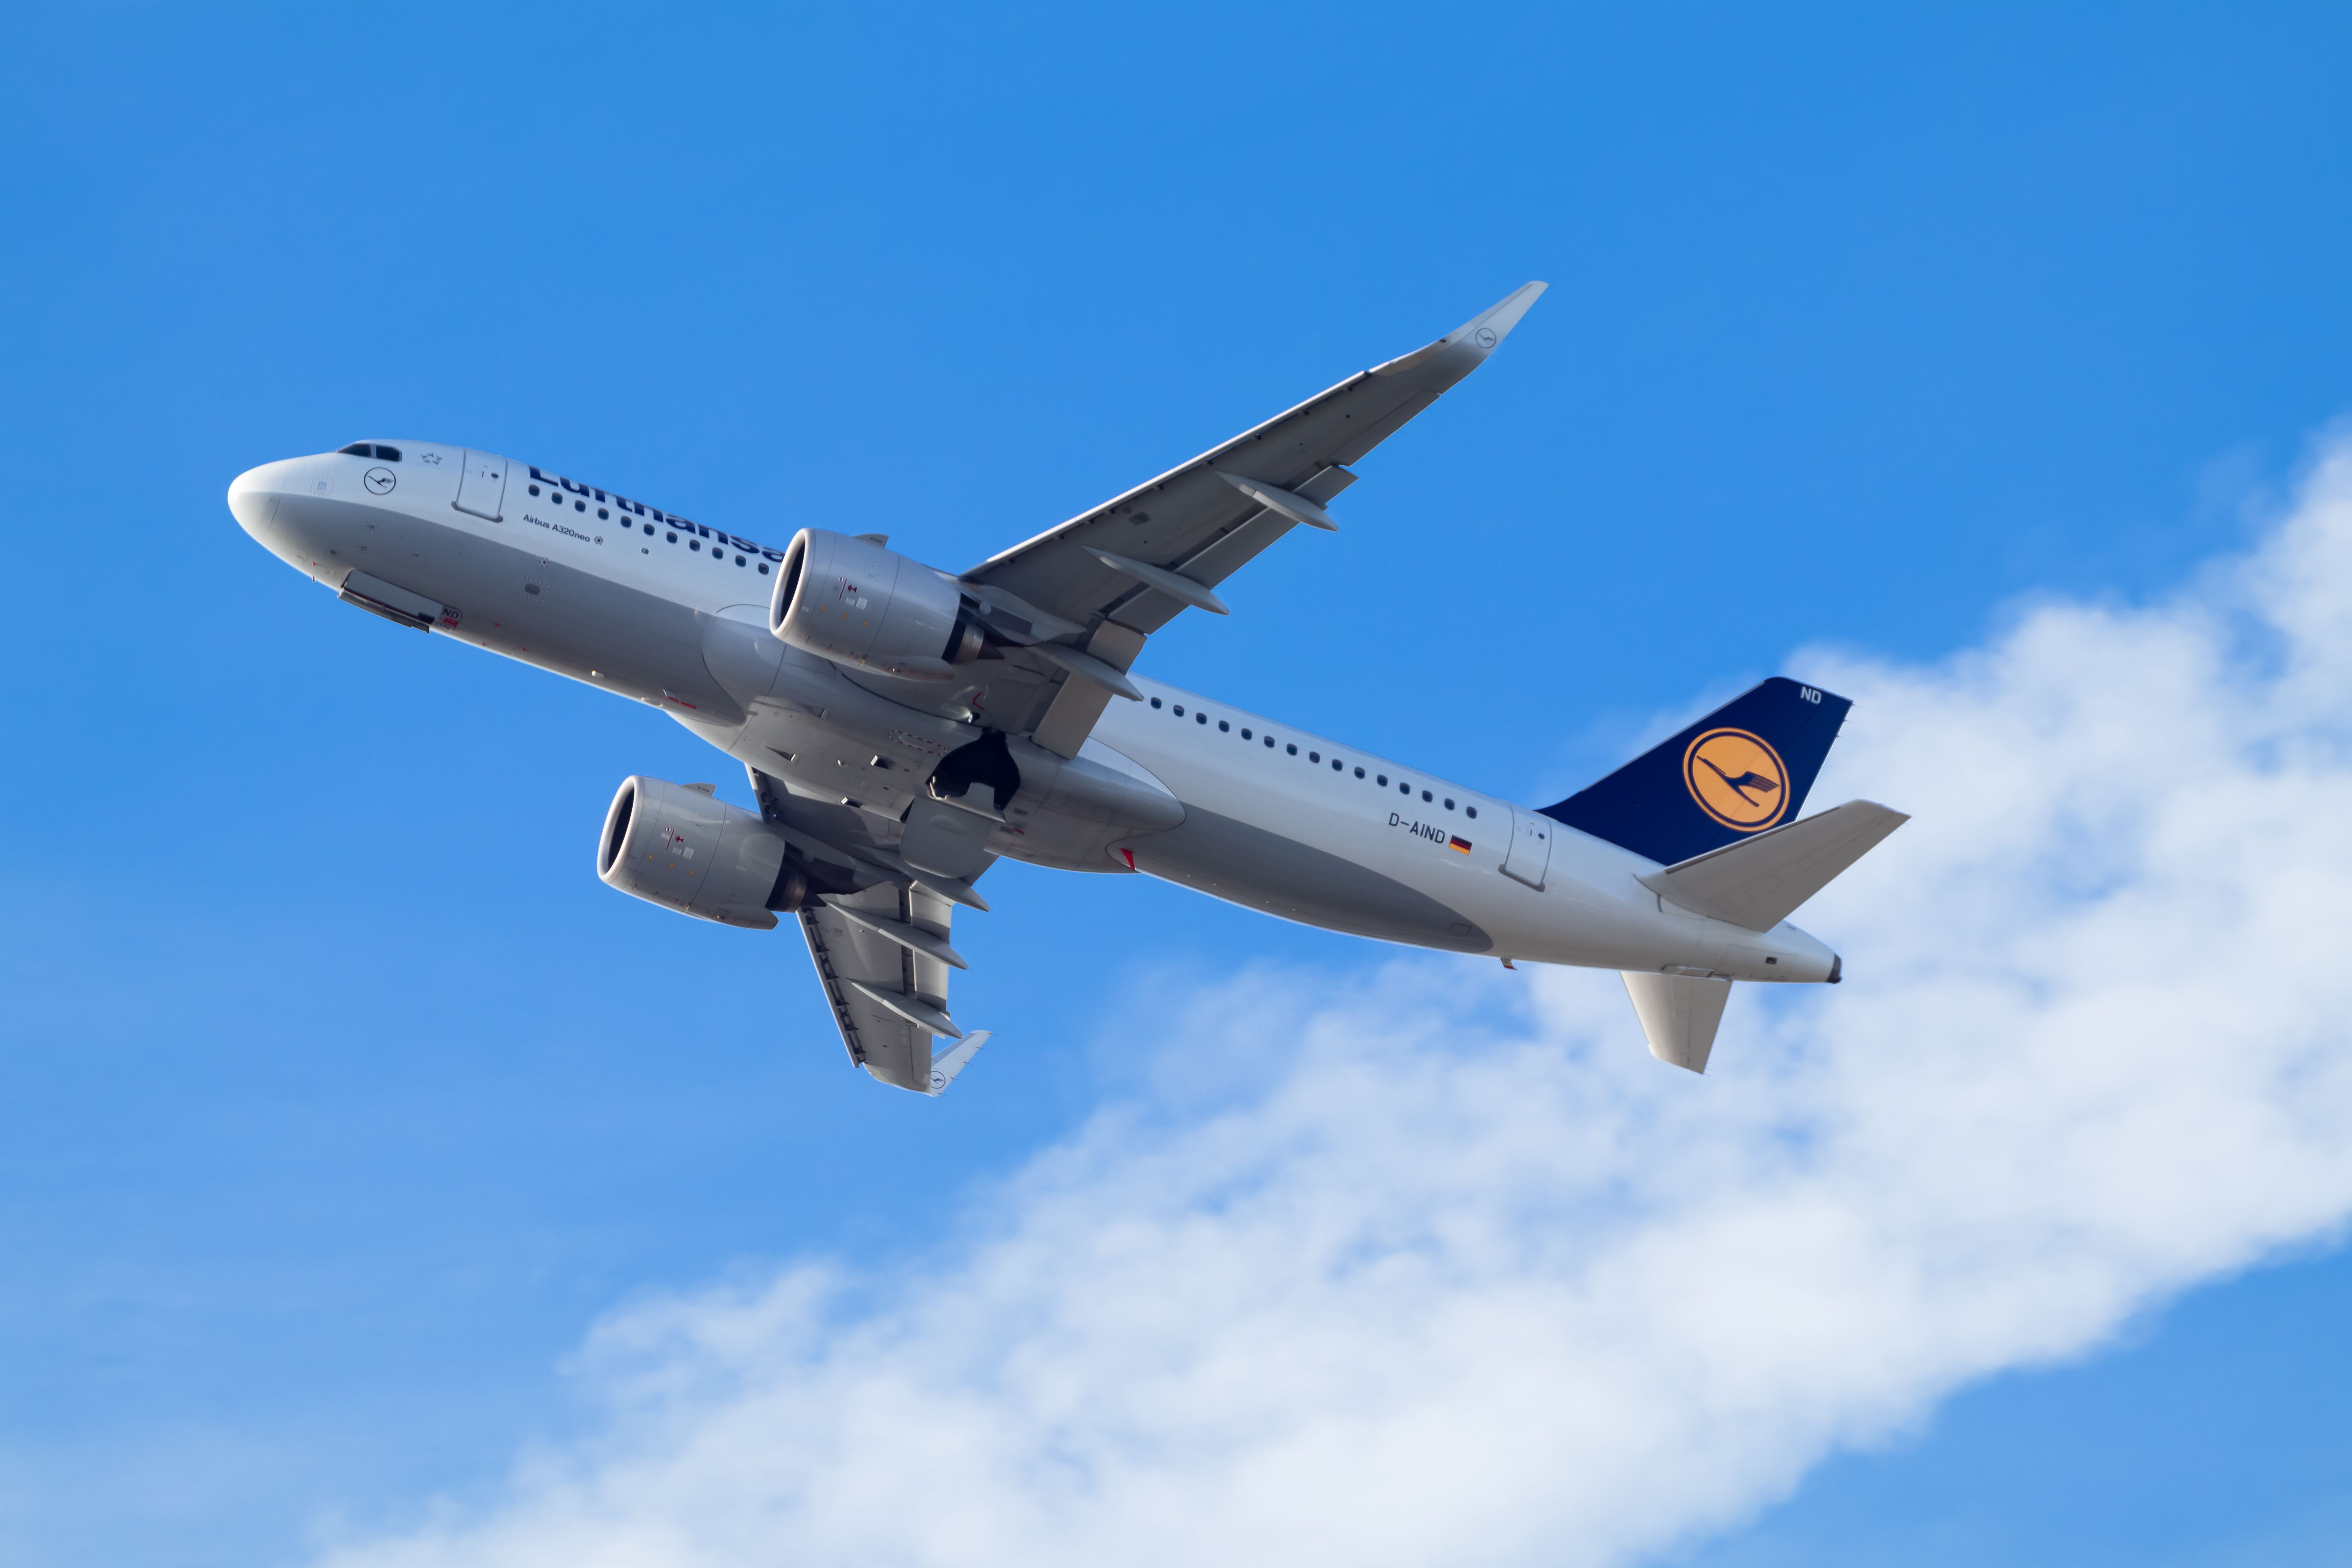 A Lufthansa A320 flying in the sky.